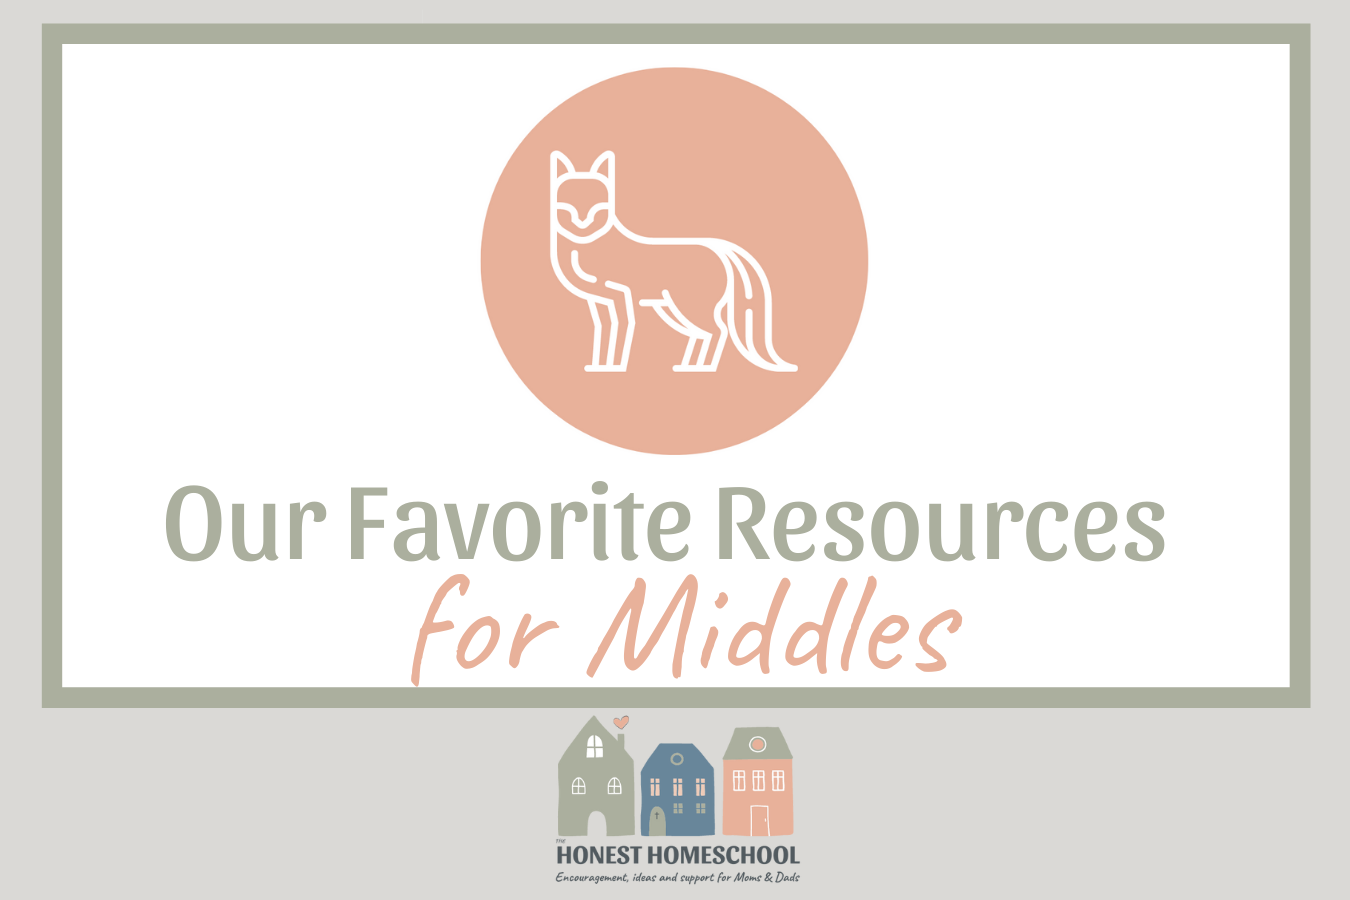 Our Favorite homeschool Resources for Middles cover image